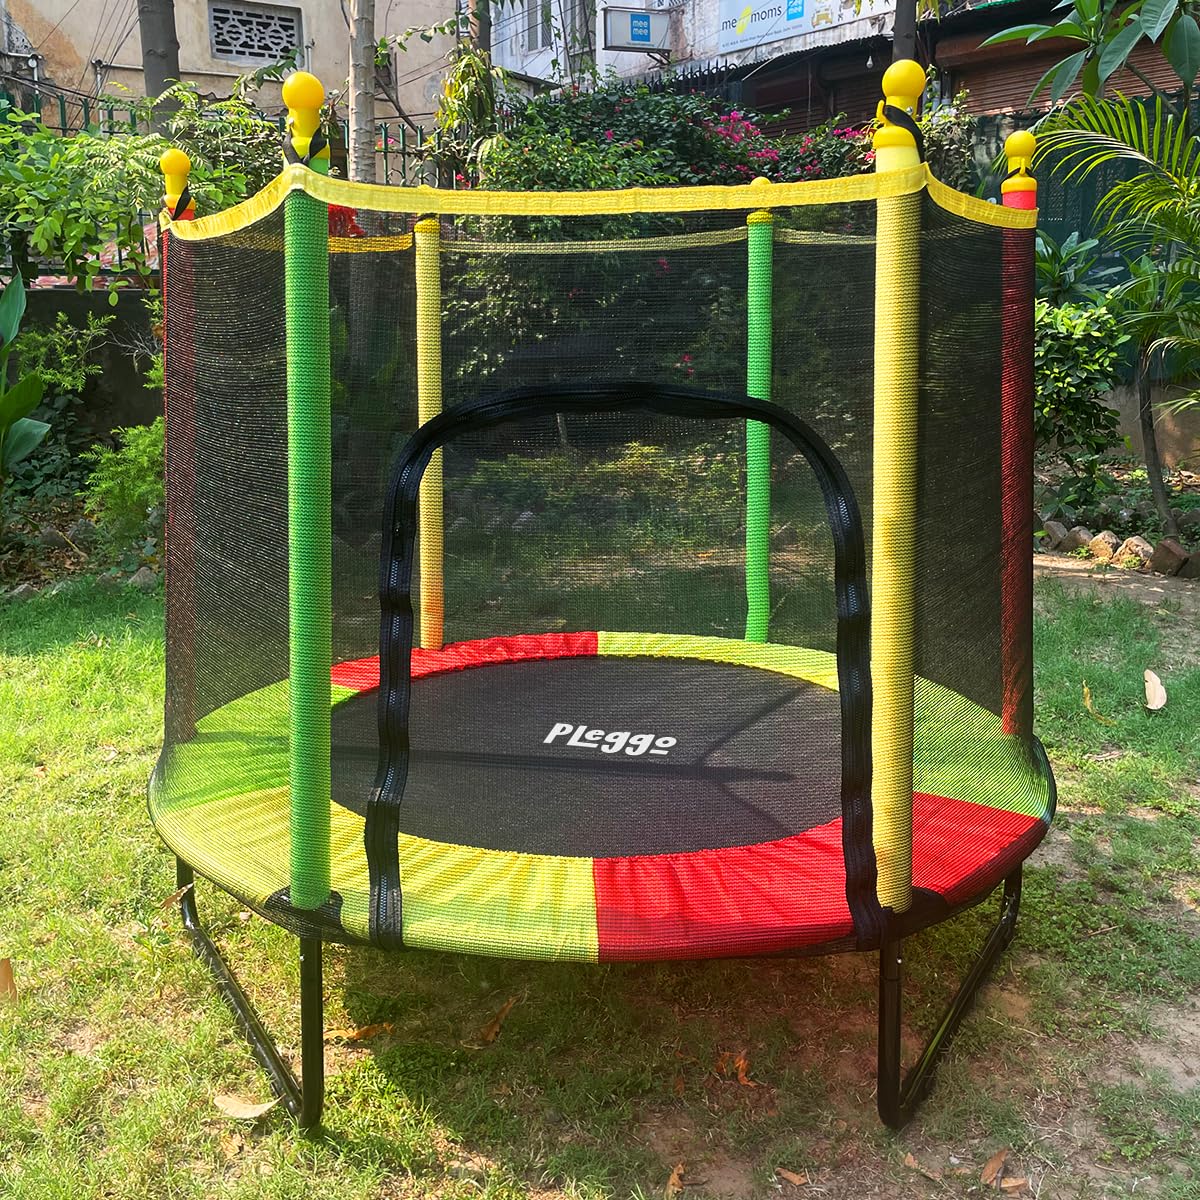 4.5 Feet Indoor & Outdoor Kids Trampoline with Safety Enclosure Net & Spring Pad